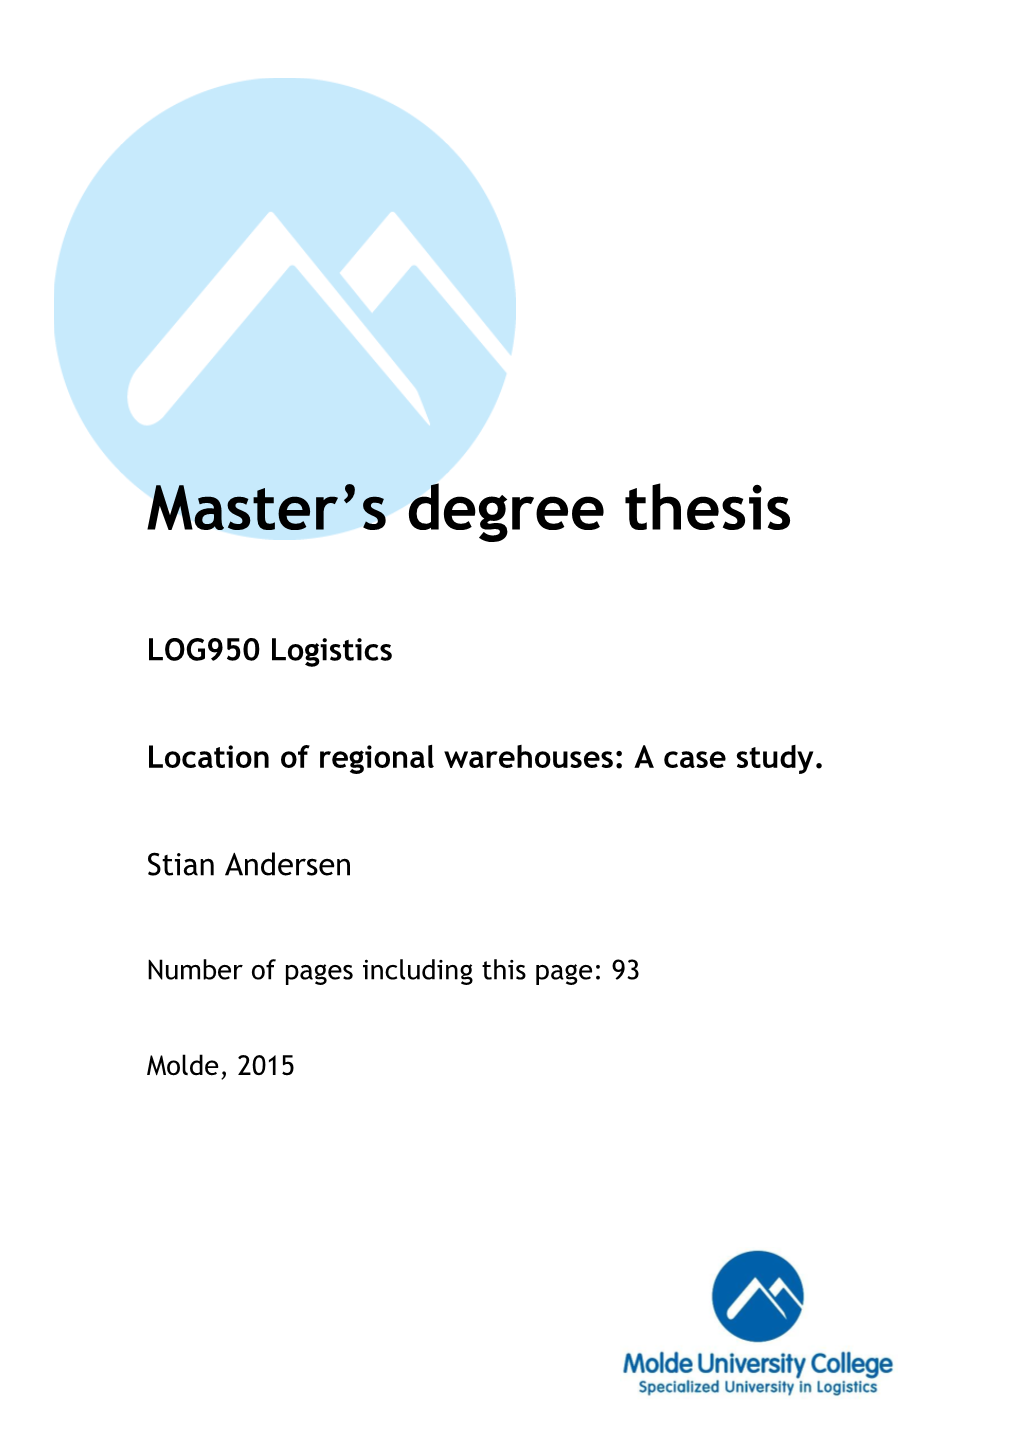 Master's Degree Thesis